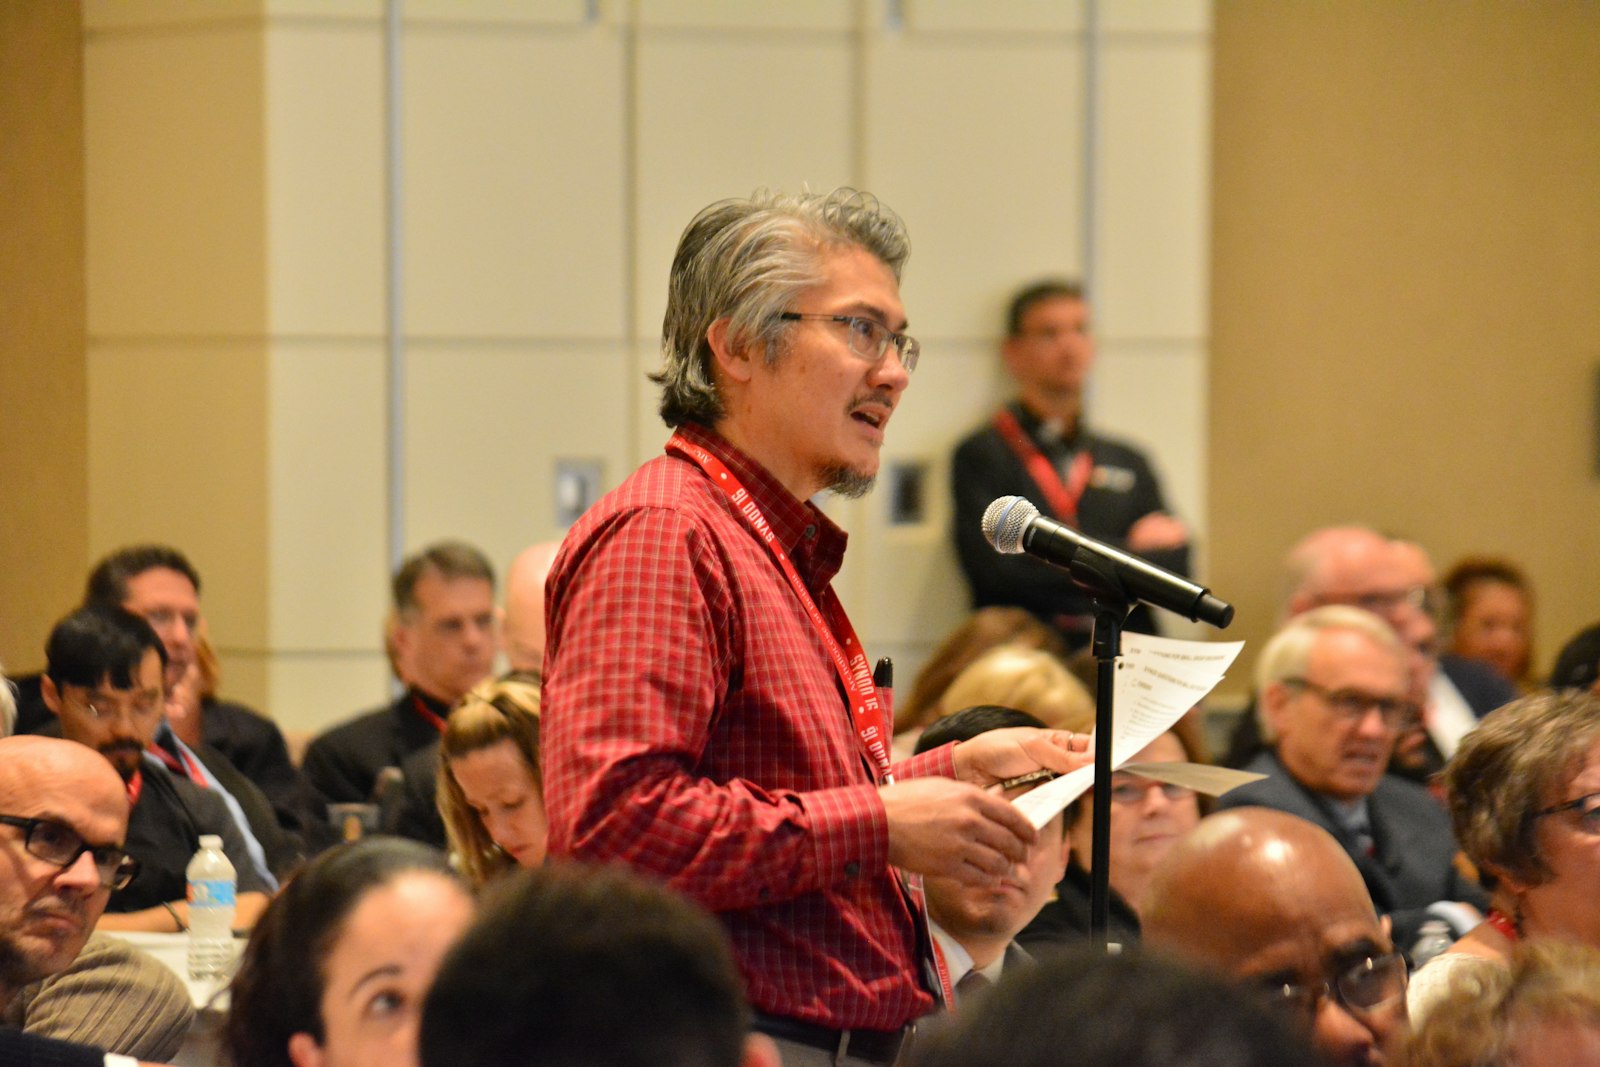 A synod member speaks during a synod session on Nov. 19, 2016, at the Westin Book Cadillac hotel in downtown Detroit. The synod offered an opportunity to hear from the whole Church in southeast Michigan, with more than 11,000 pieces of input received before the three-day gathering from members of the faithful. (Michael Stechschulte | Detroit Catholic)